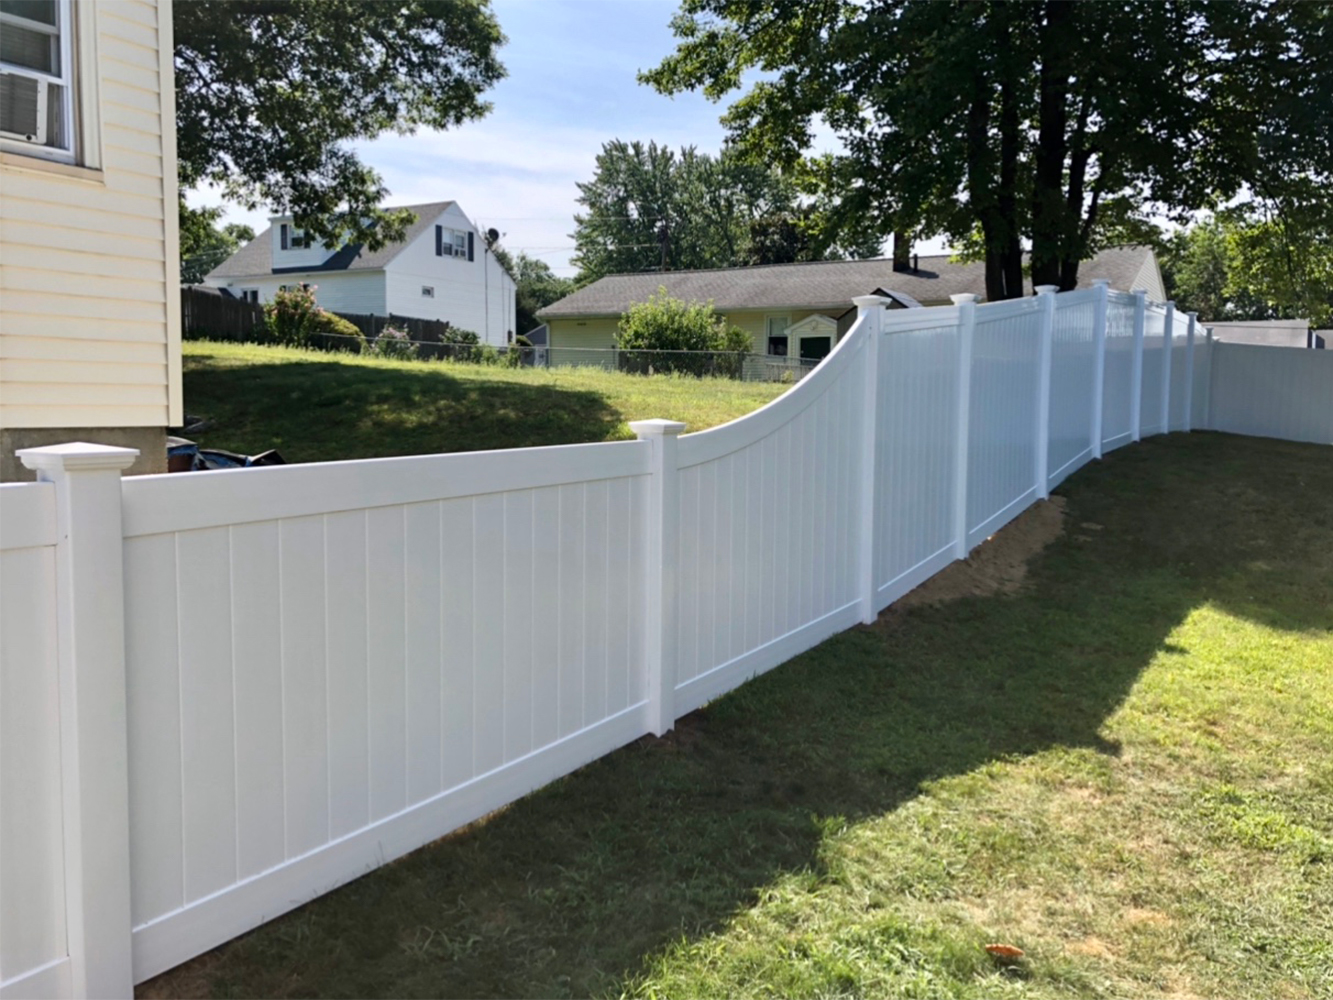 Photo of a Vinyl Fence in Derry, New Hampshire